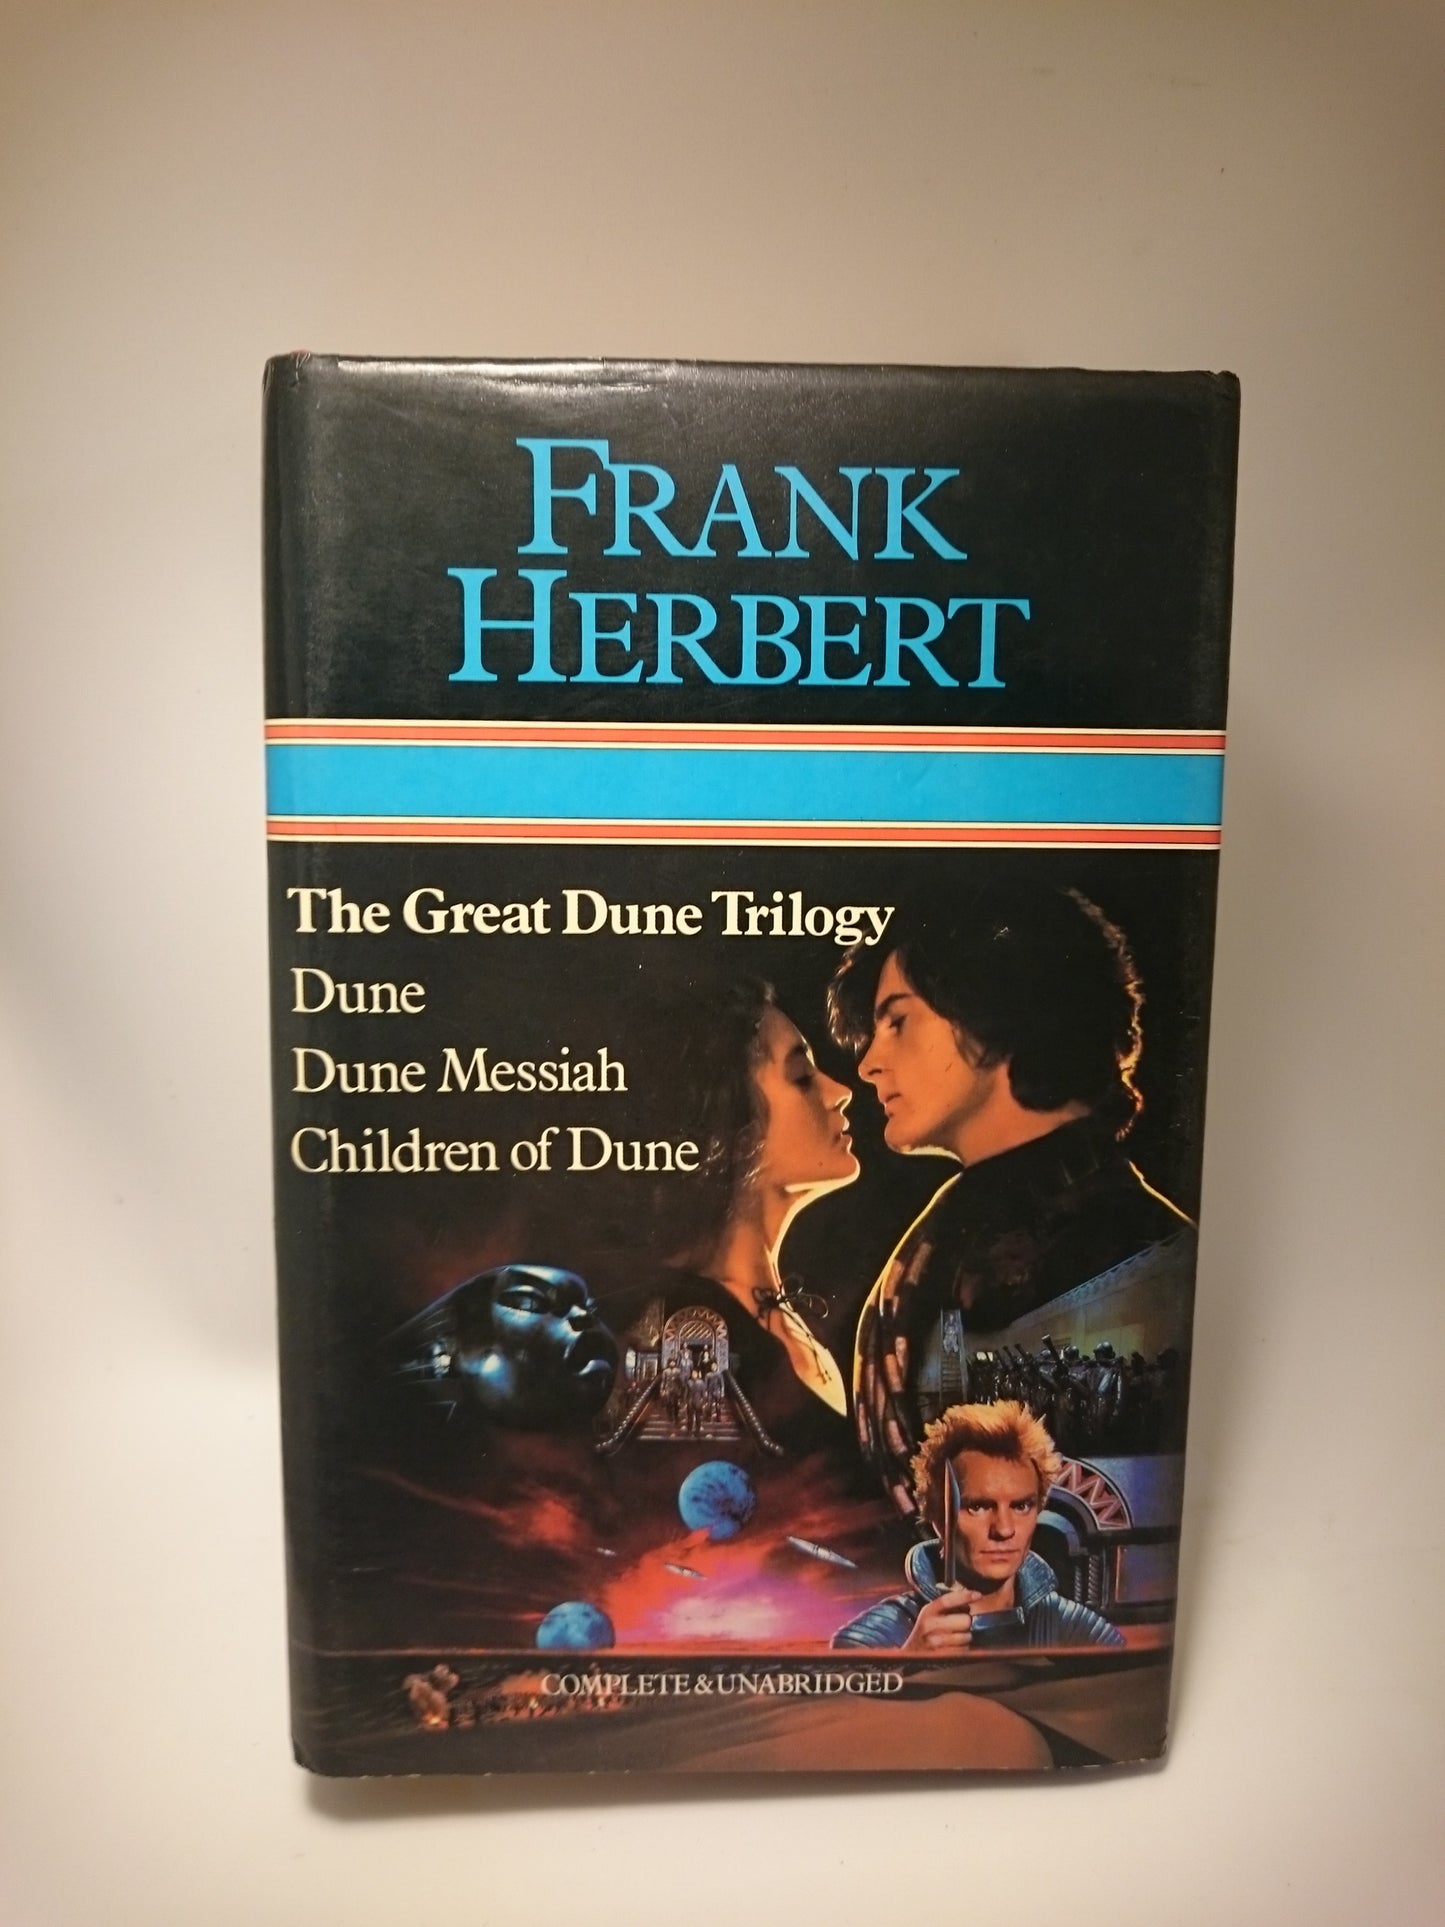 The great Dune trilogy